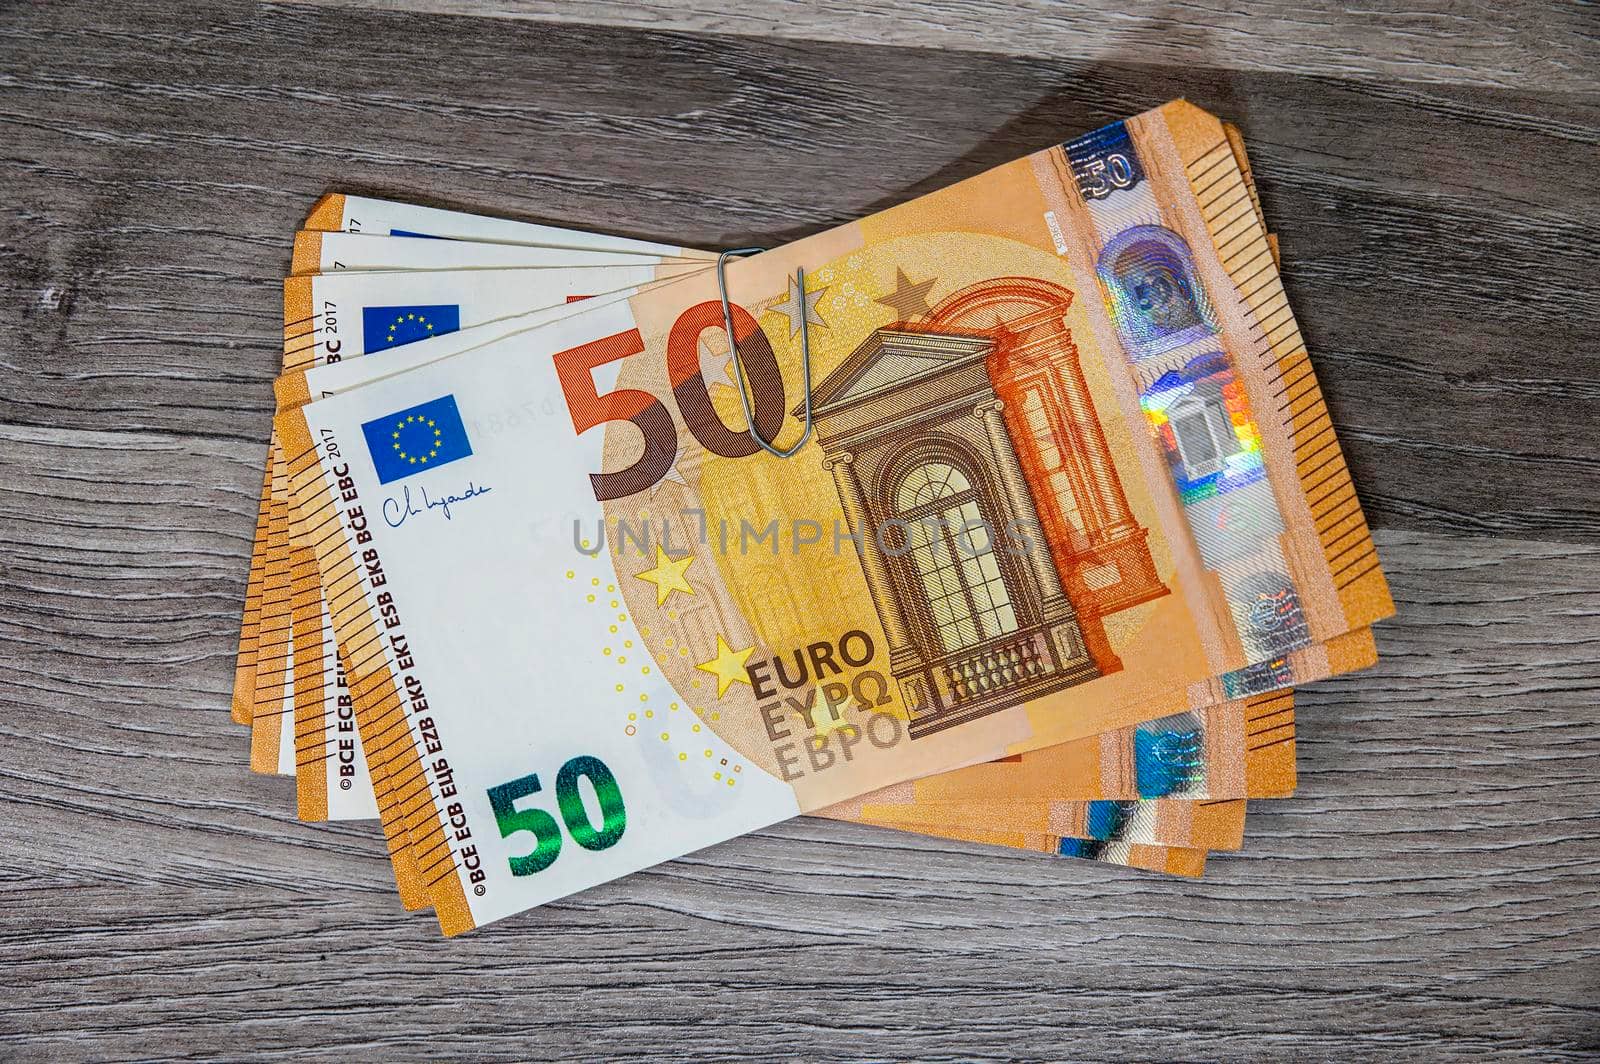 50 euro banknote wad with pin by carfedeph